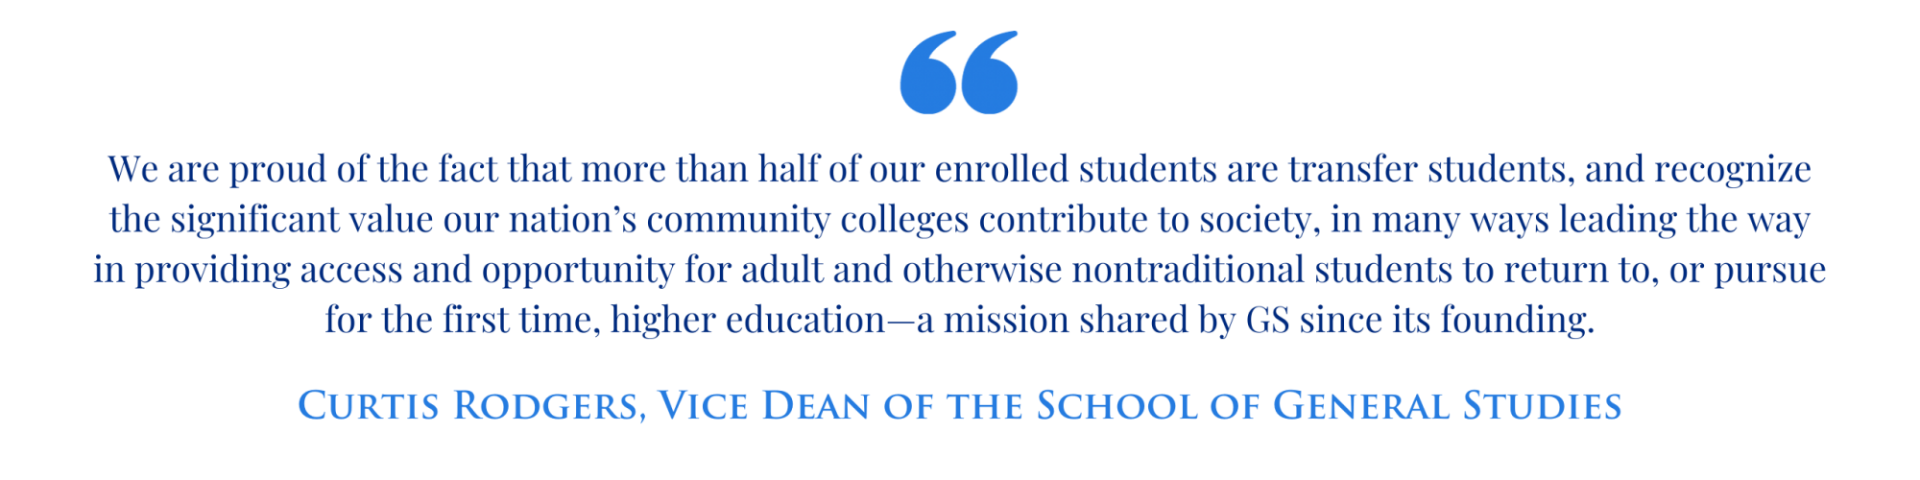 Quote from GS Vice Dean Curtis Rodgers: "We are proud of the fact that more than half of our enrolled students are transfer students, and recognize the significant value our nation’s community colleges contribute to society, in many ways leading the way in providing access and opportunity for adult and otherwise nontraditional students to return to, or pursue for the first time, higher education—a mission shared by GS since its founding."